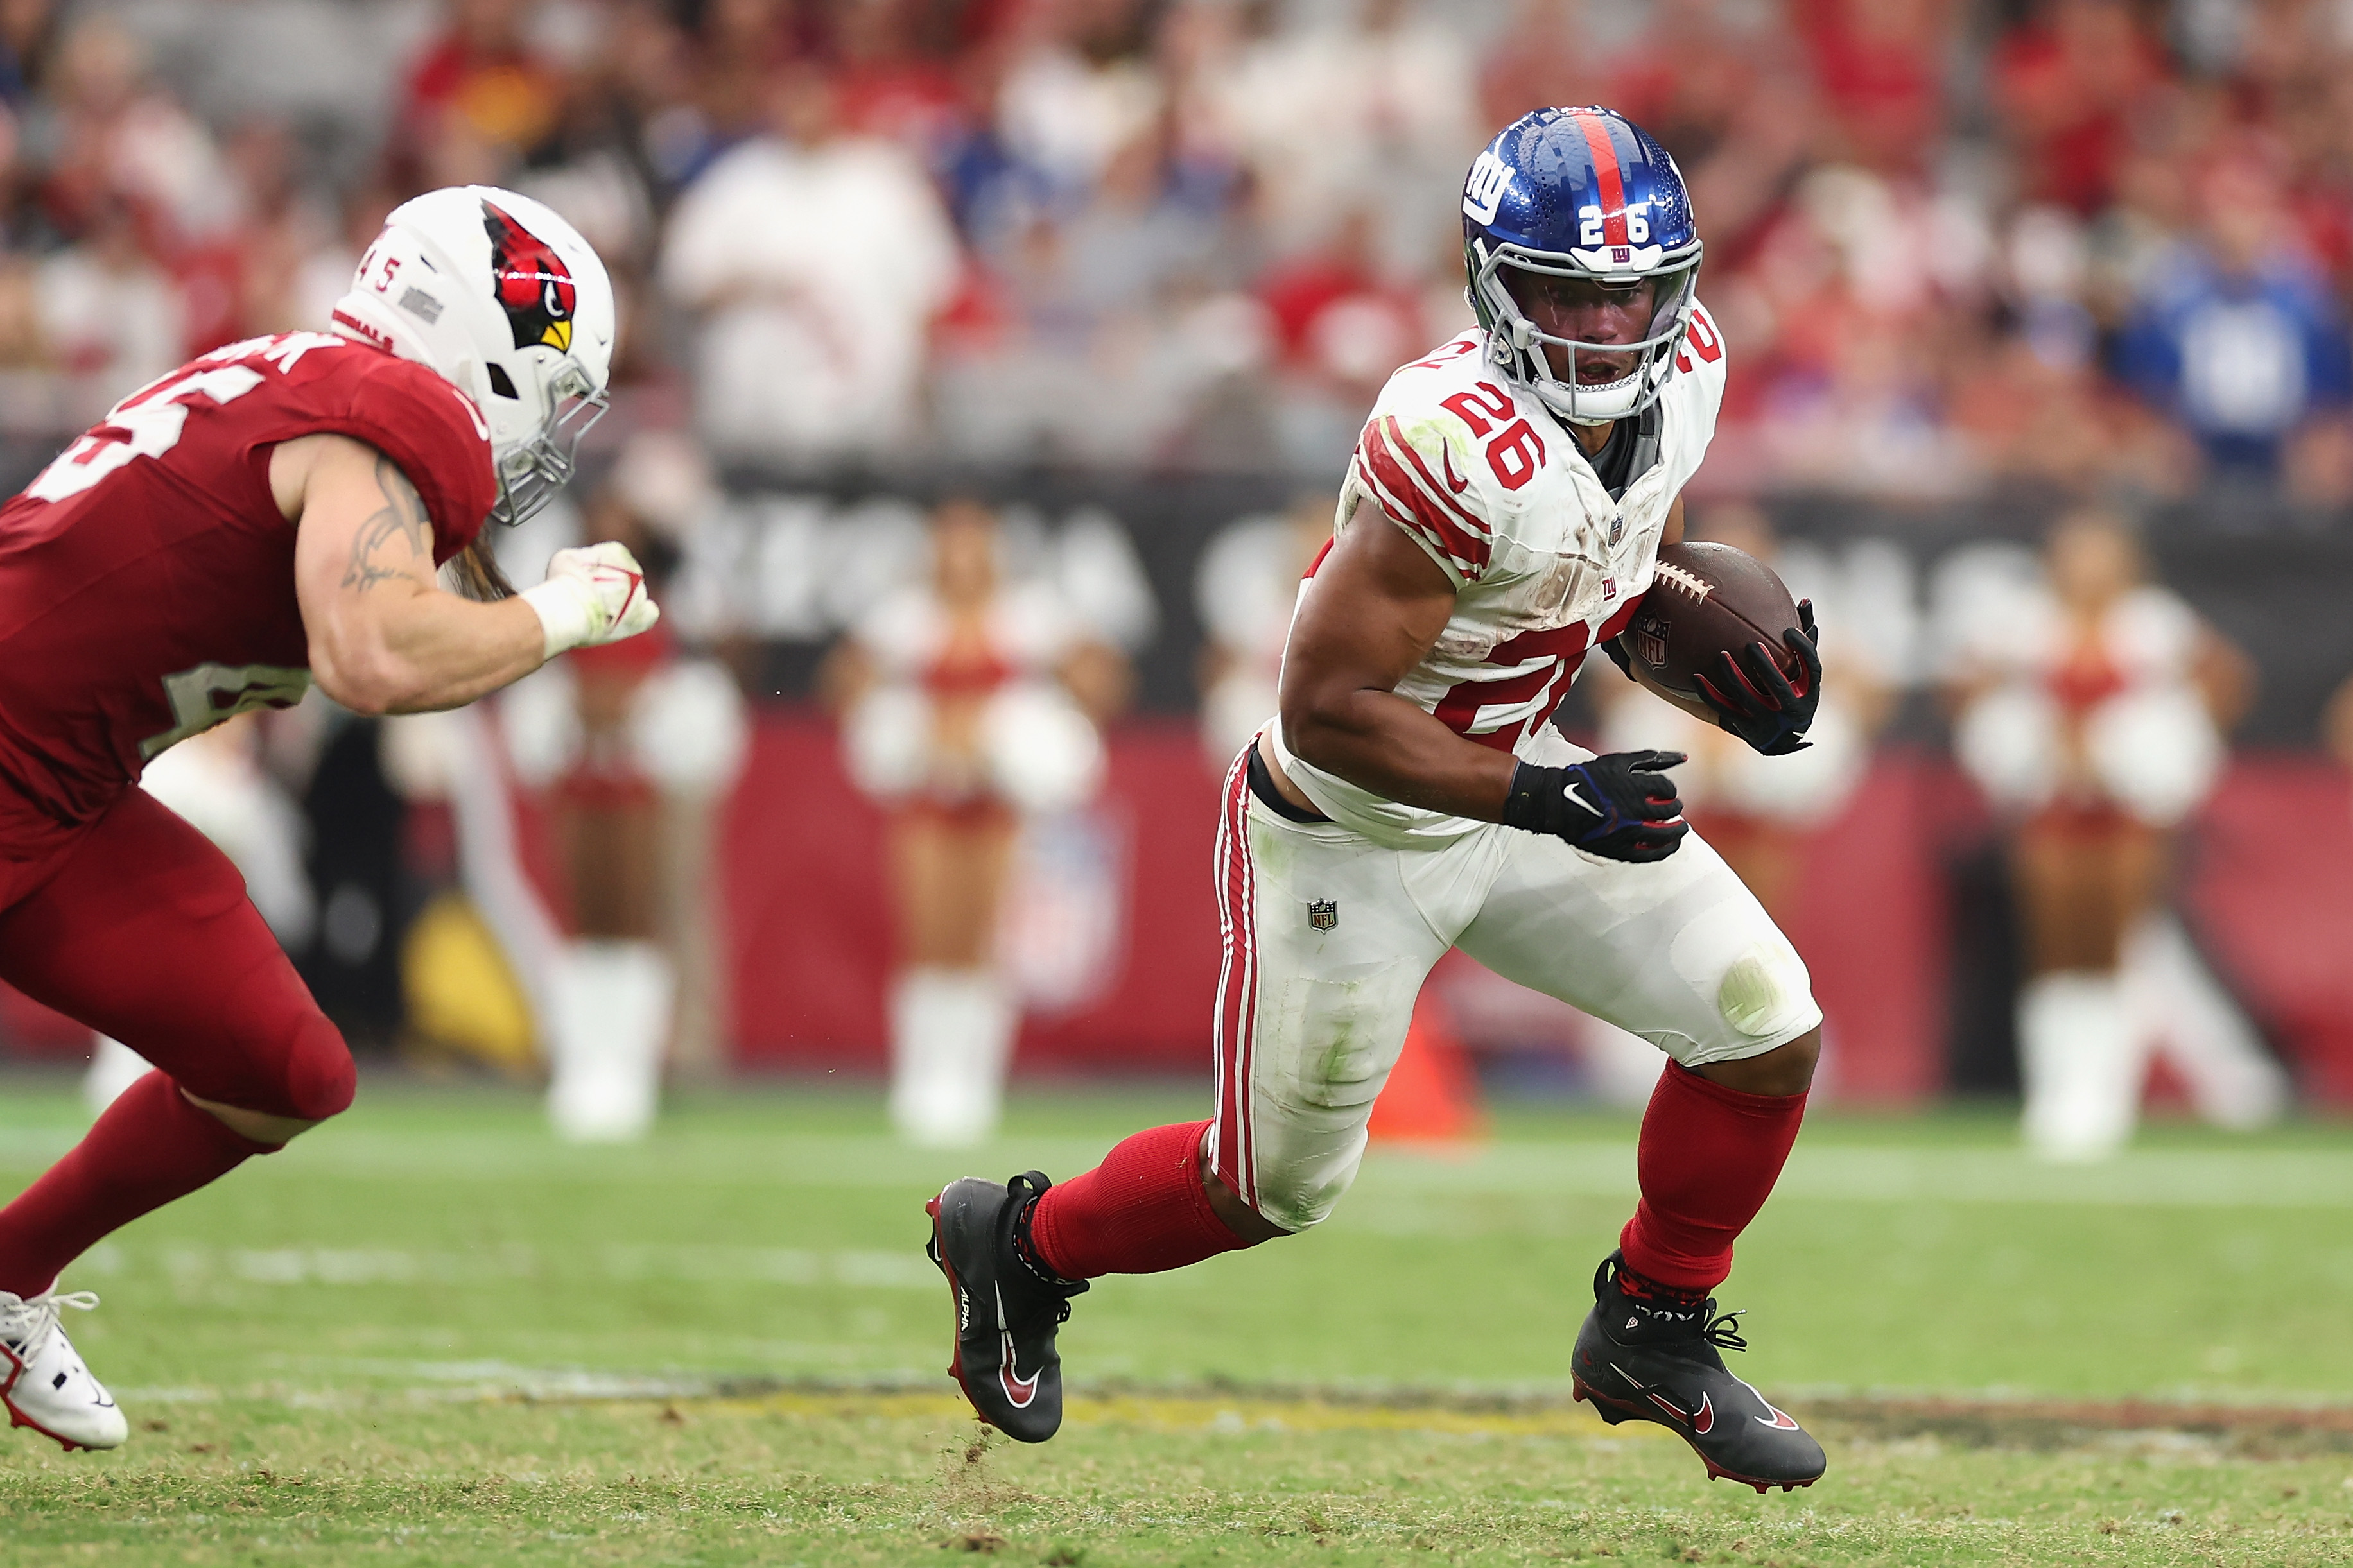 Running back Saquon Barkley of the New York Giants rushes the football against the Arizona Cardinals.